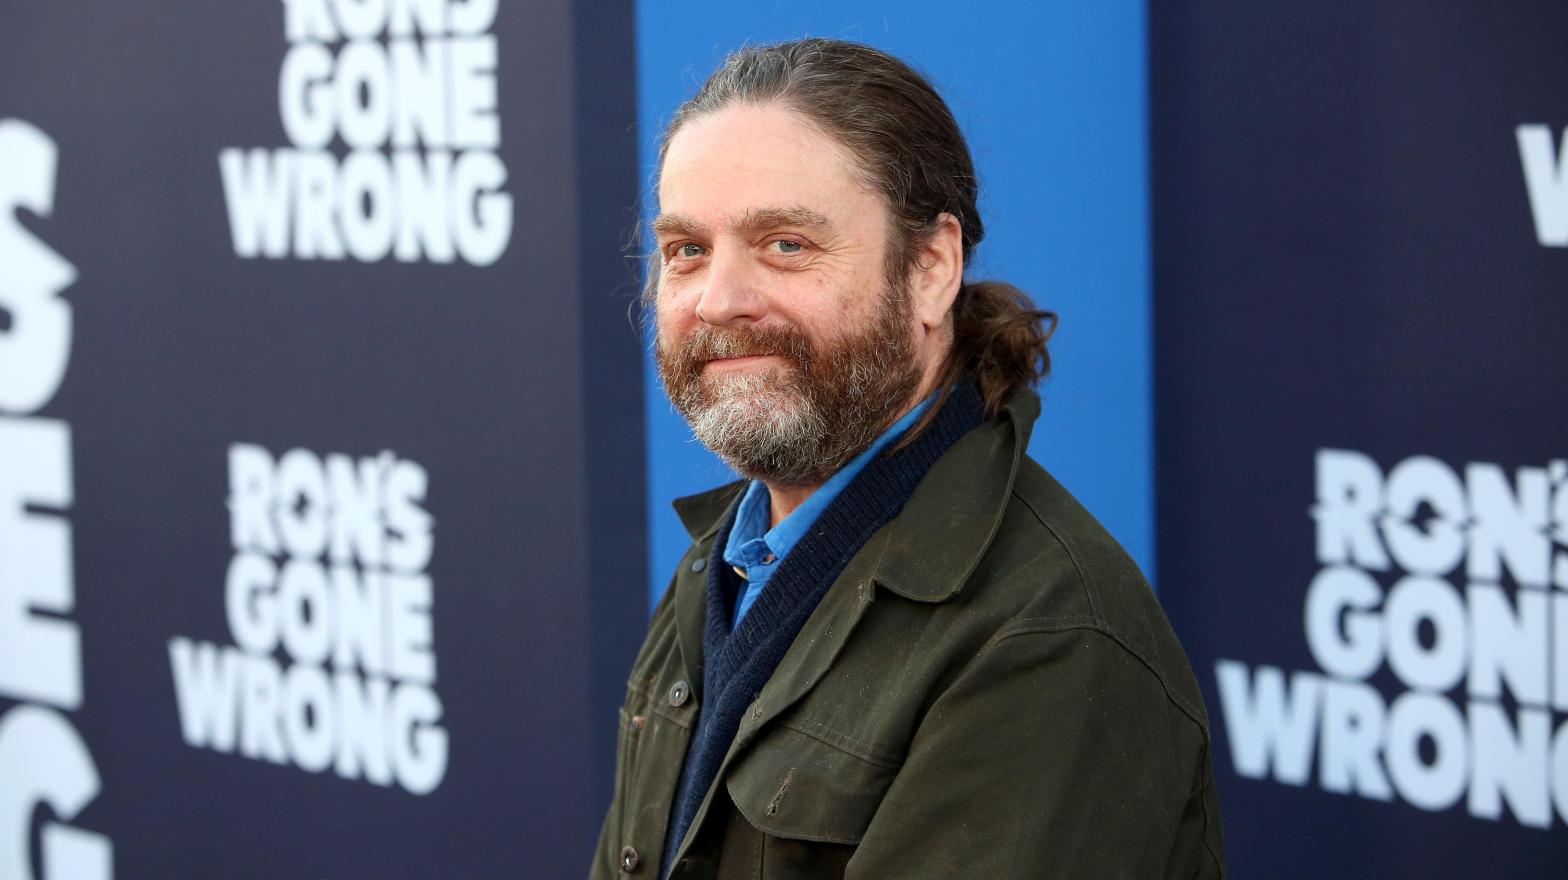 Zach Galifianakis arrives at the U.S. premiere of Ron's Gone Wrong on October 19, 2021 in Hollywood, California. (Photo: Jesse Grant/Getty Images for Disney, Getty Images)